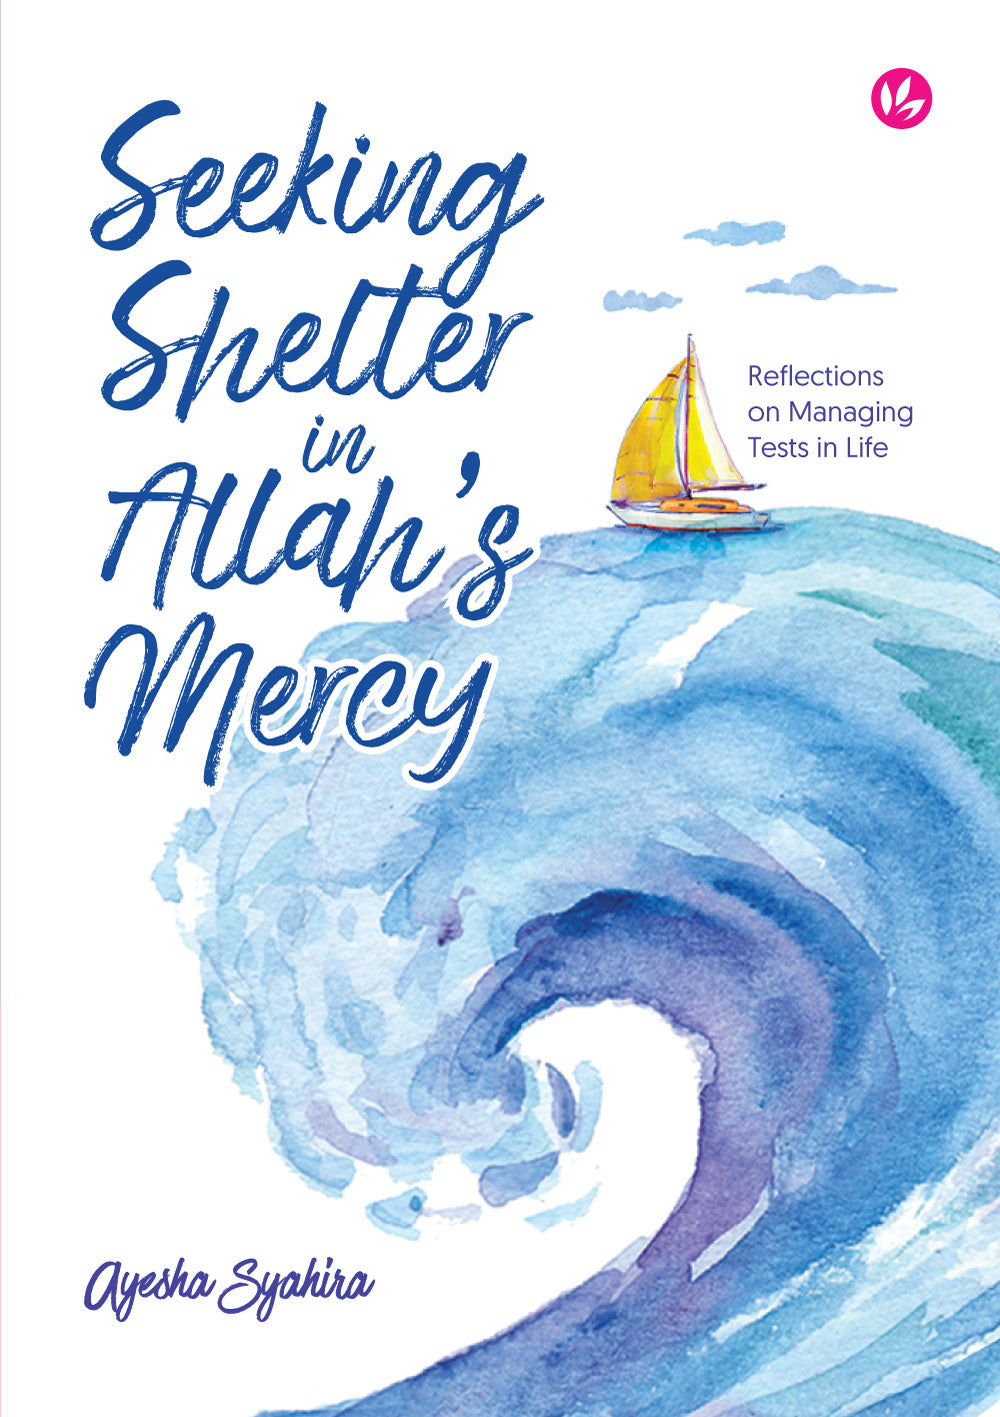 Iman Publication Book Seeking Shelter in Allah’s Mercy: Reflections on Managing Tests in Life by Ayesha Syahira 201232